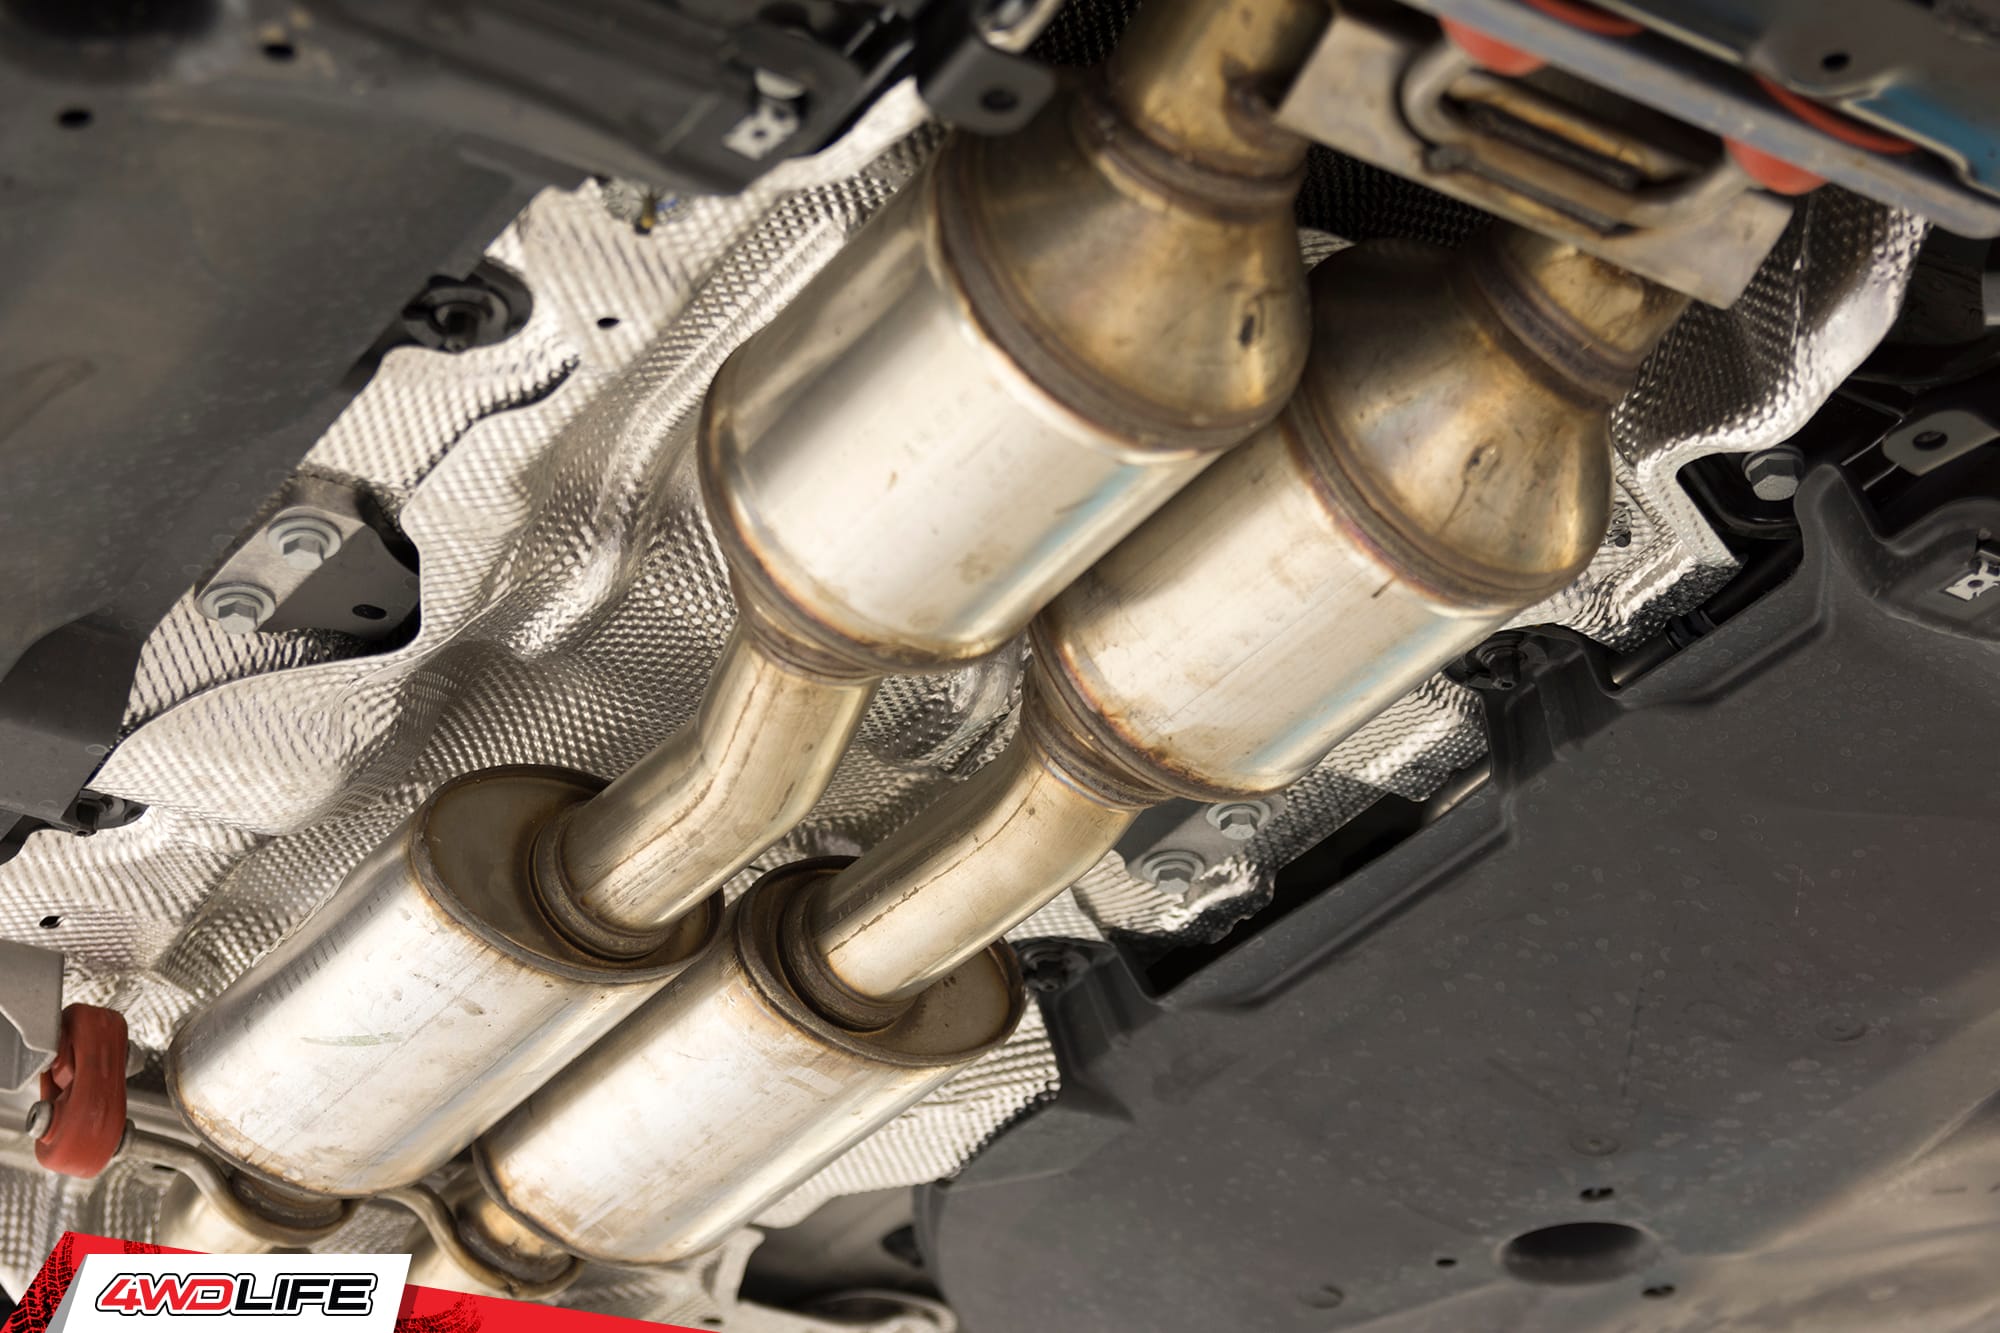 The Best Catalytic Converter Our 9 Top Options Reviewed